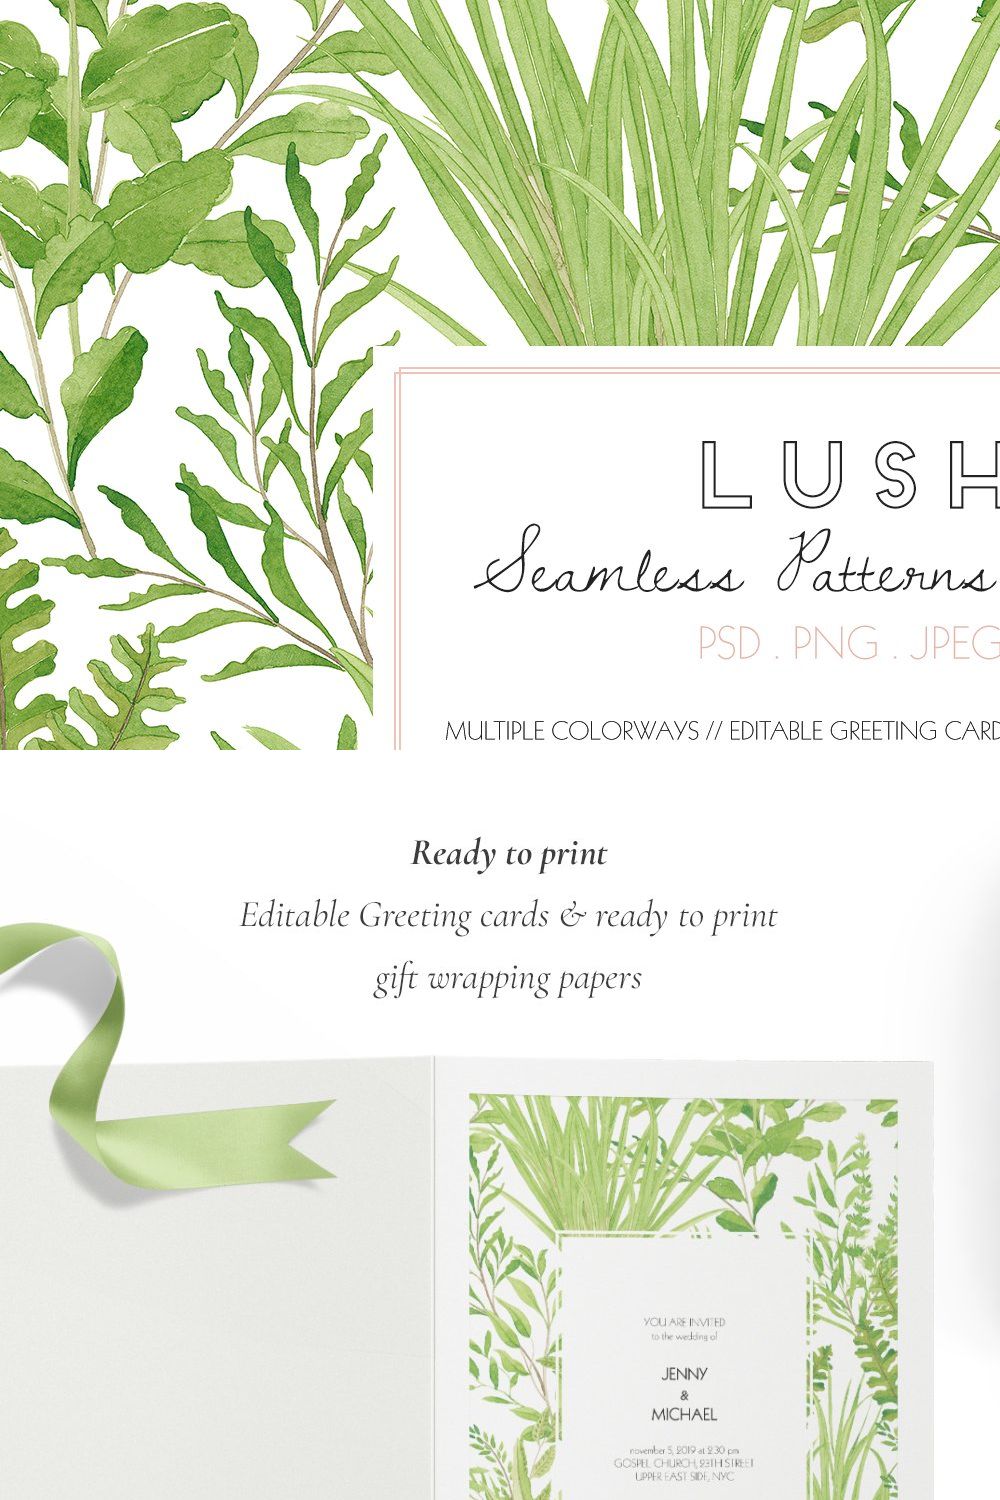 LUSH - Hand Painted Watercolor Print pinterest preview image.